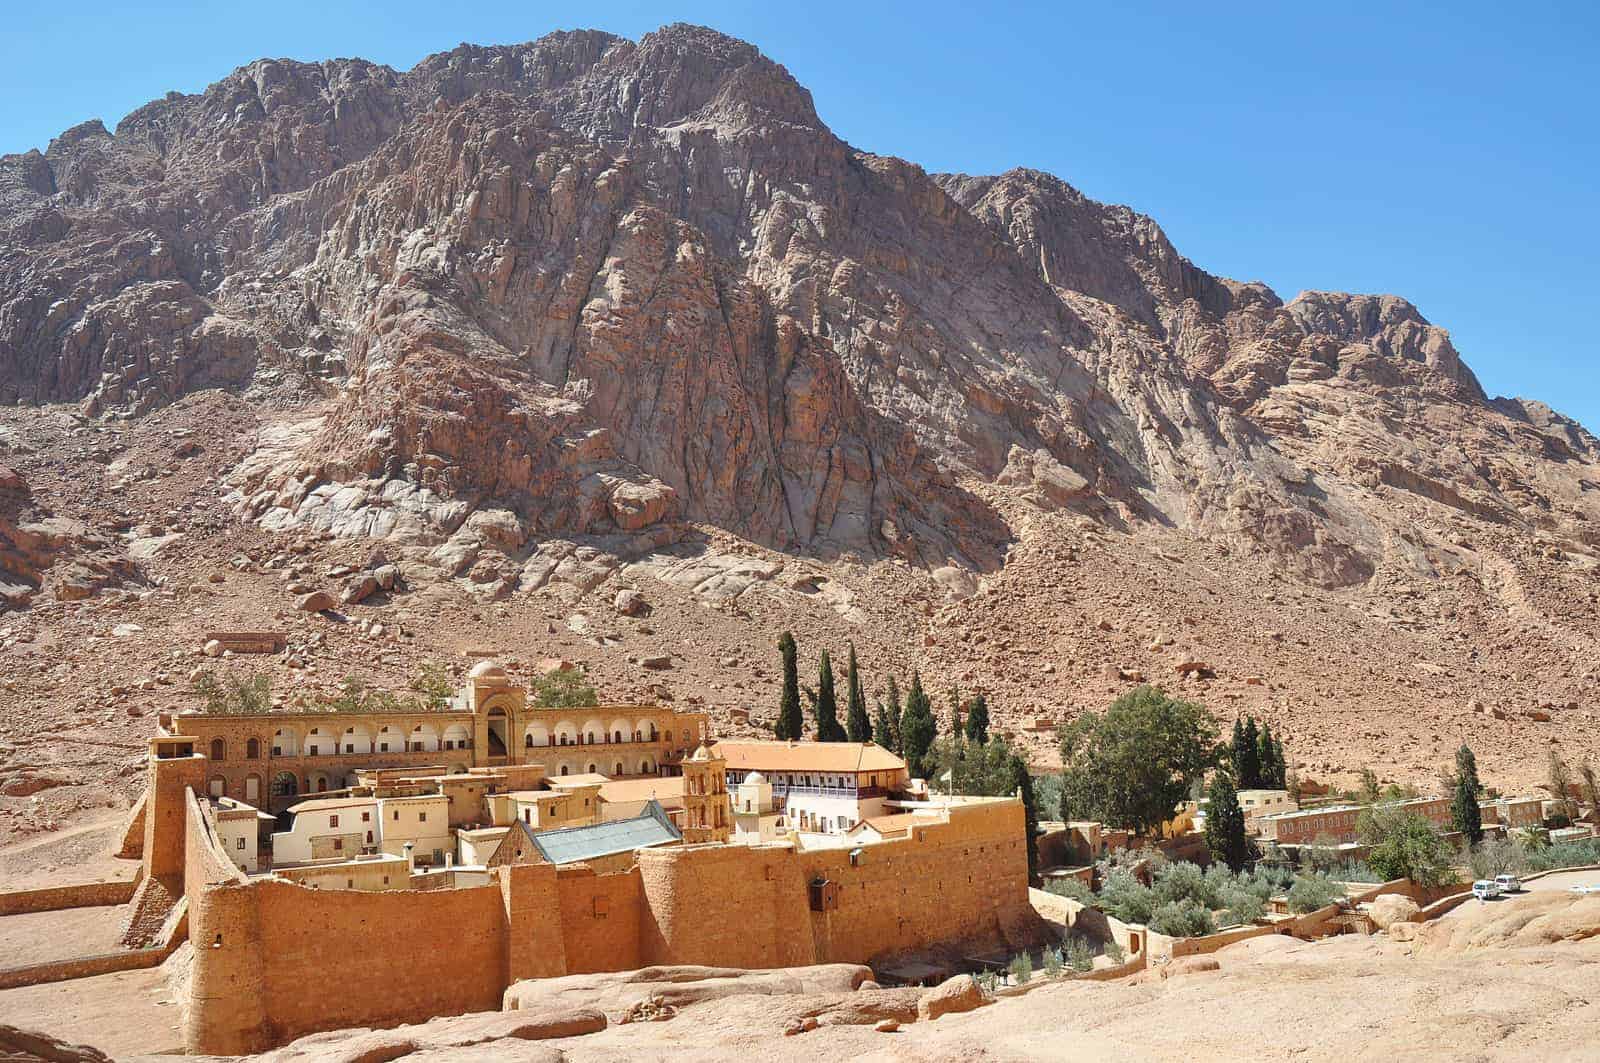 St. Catherine Monastery is one of the most amazing Christina monuments in Egypt - Photo Credit: Encyclopaedia Britannica